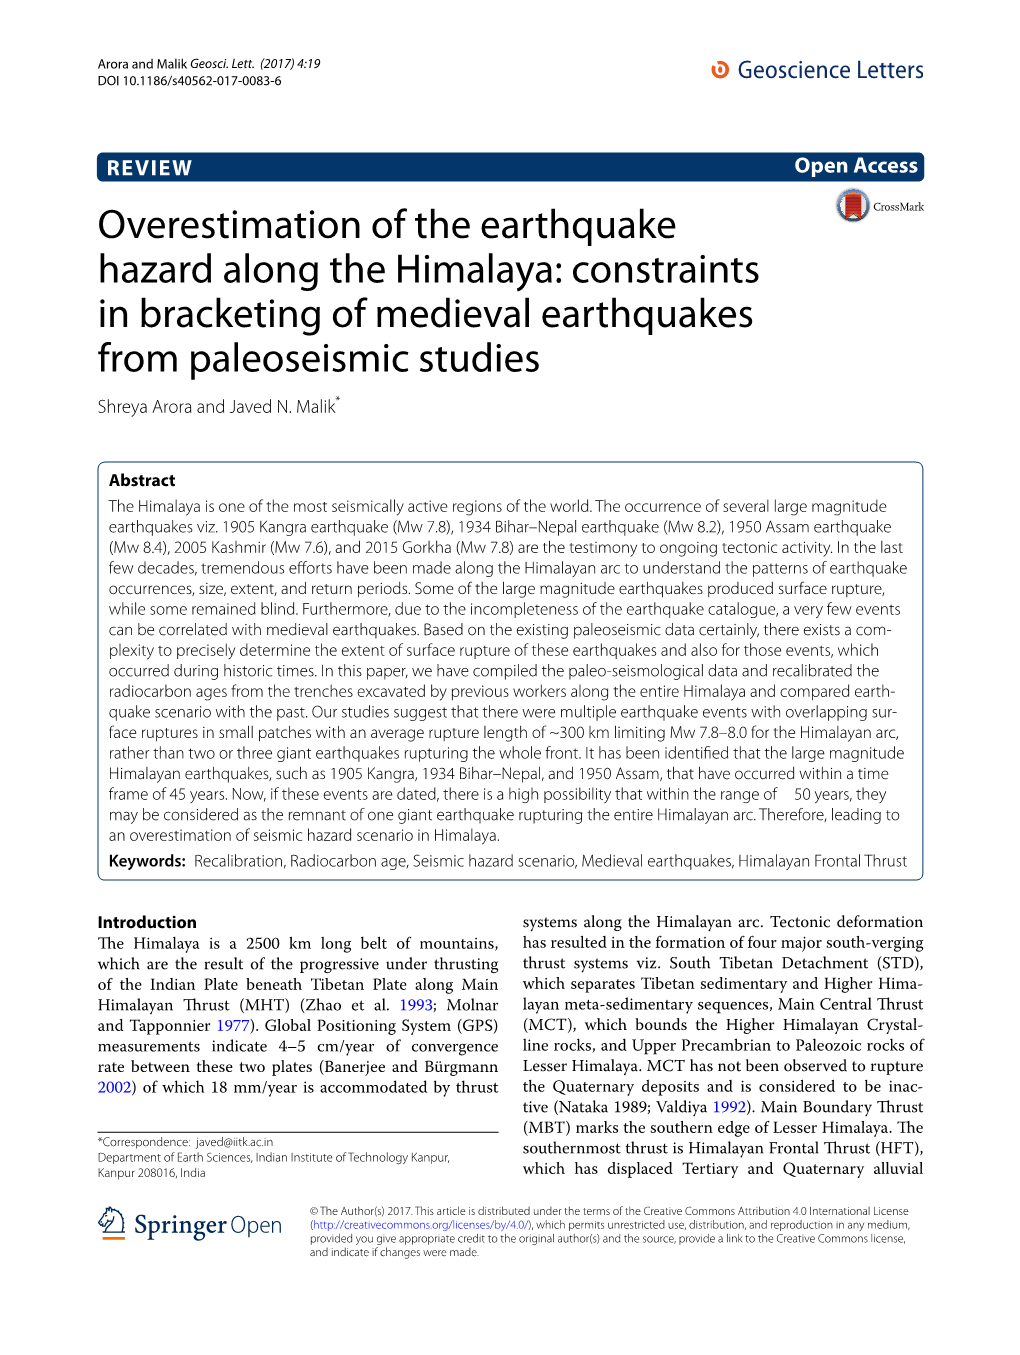 Overestimation of the Earthquake Hazard Along the Himalaya: Constraints in Bracketing of Medieval Earthquakes from Paleoseismic Studies Shreya Arora and Javed N